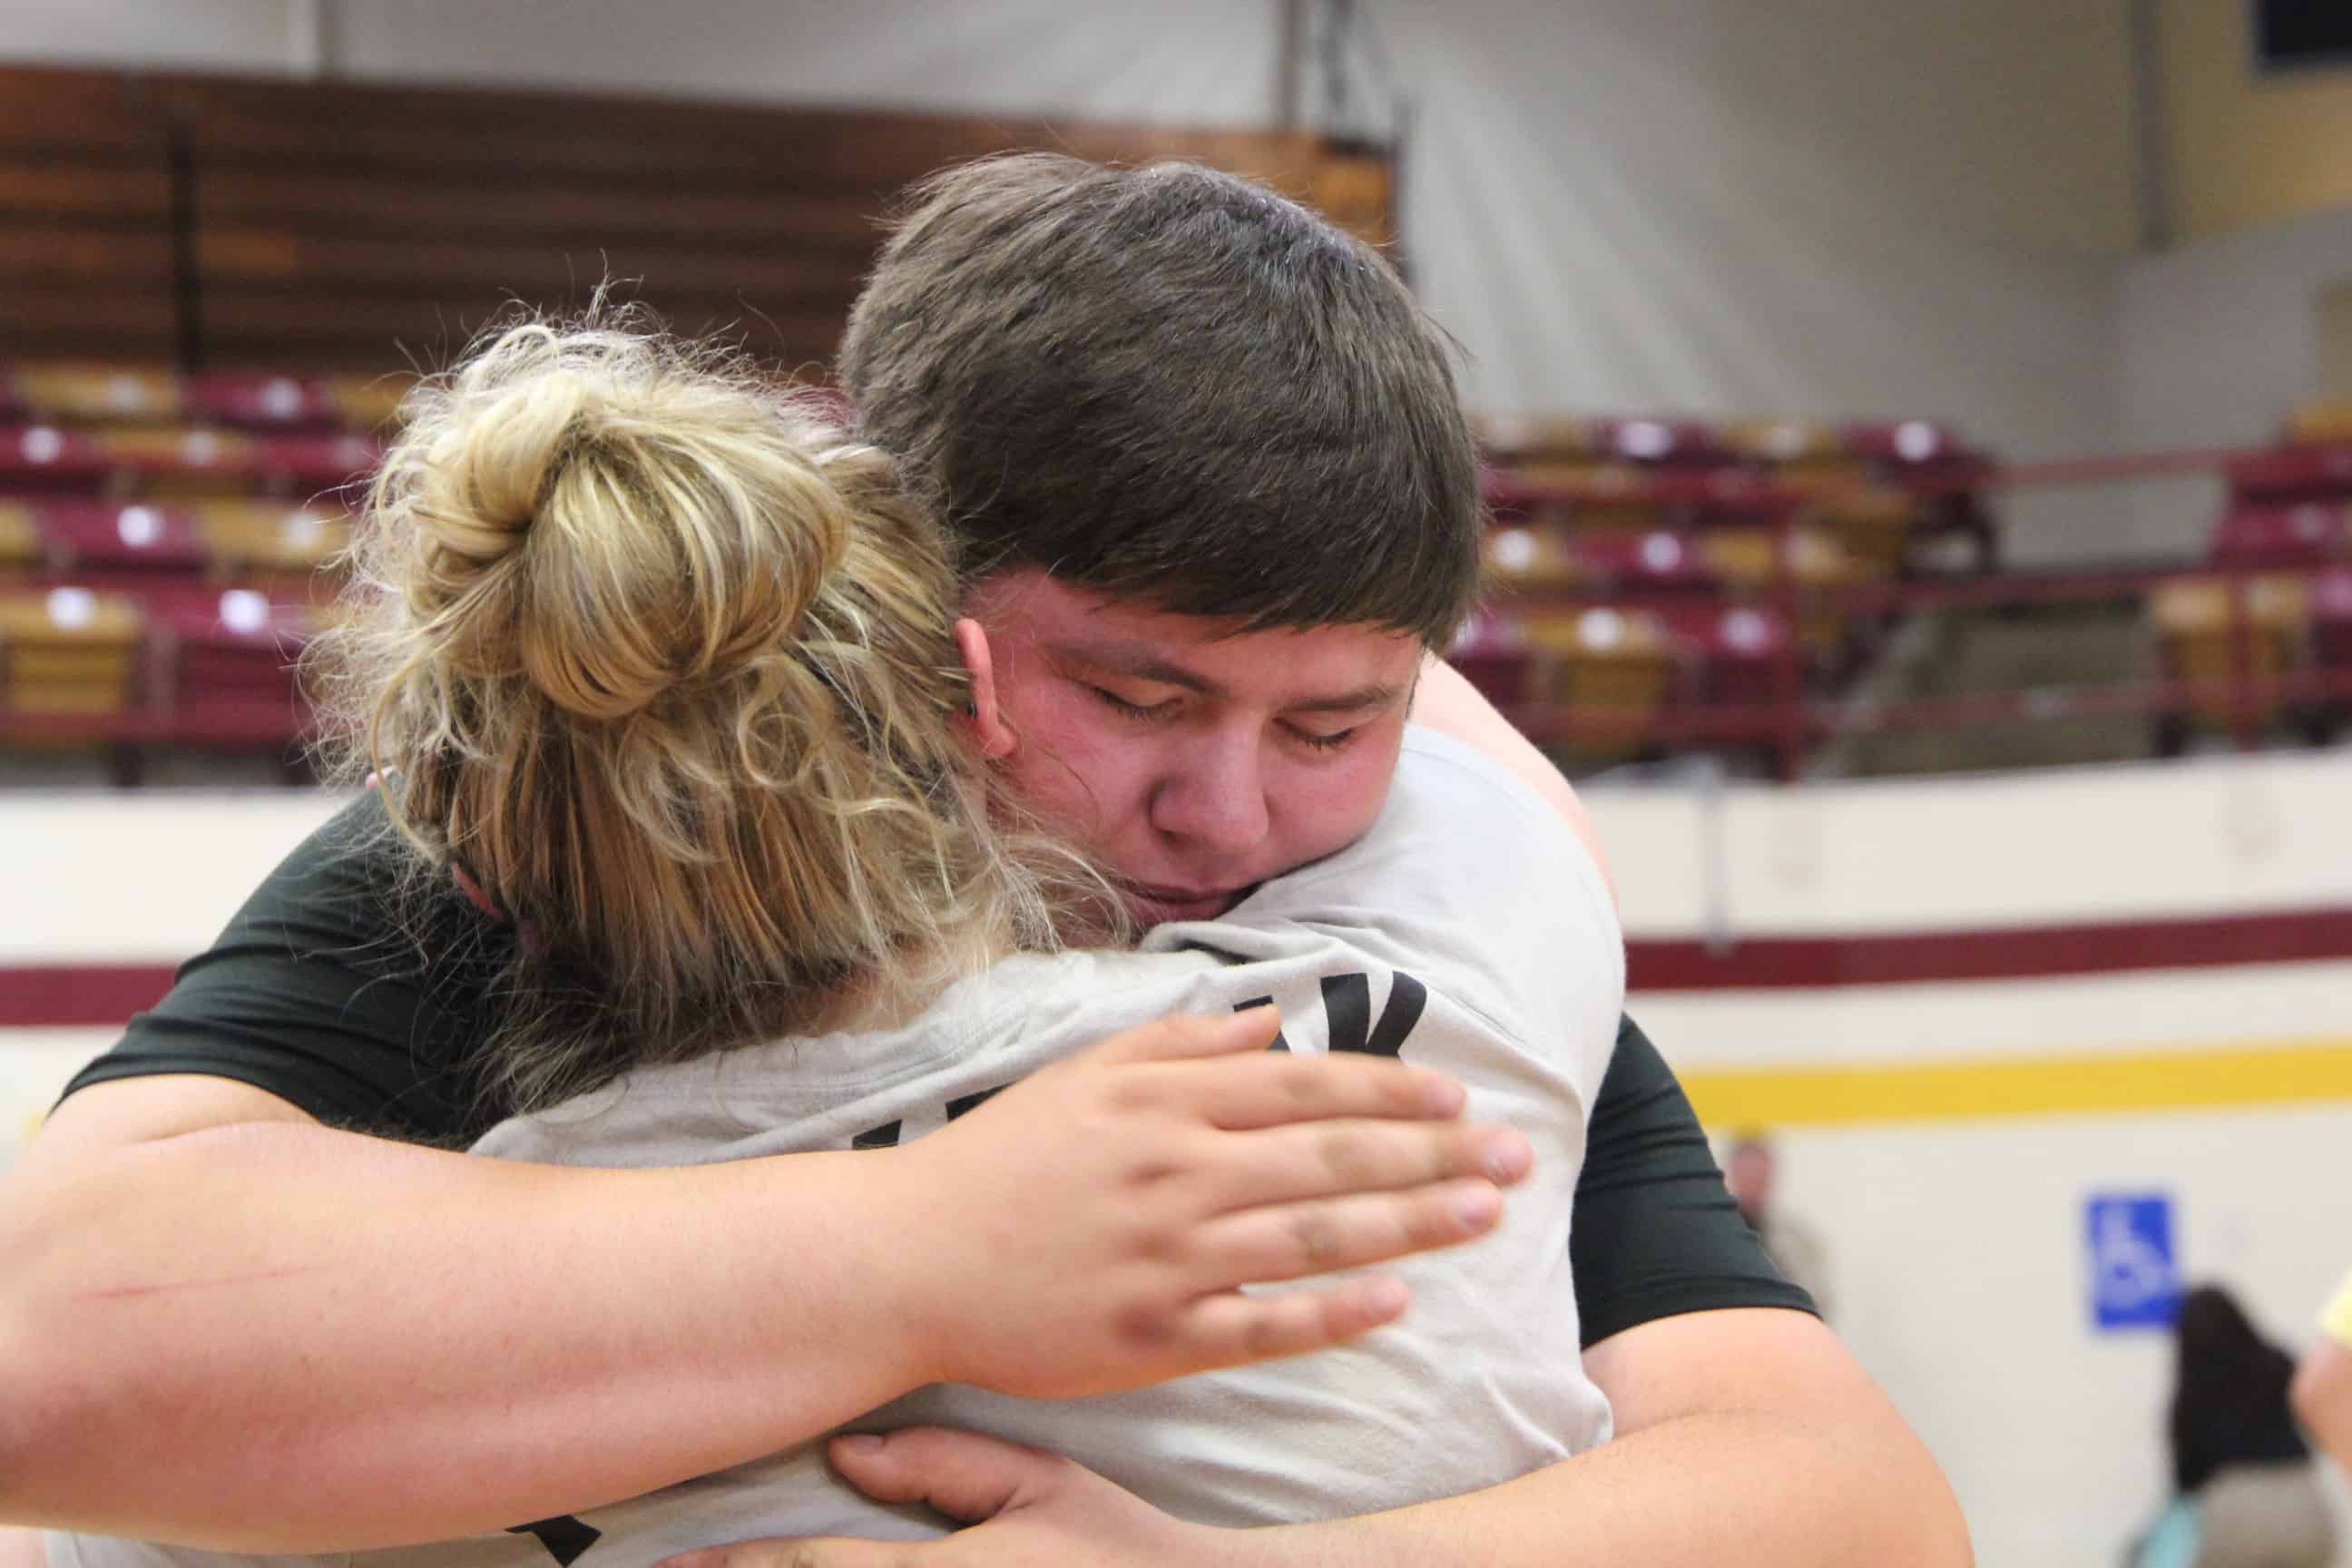 Nataly Holman with a hug of thanks to rescuer Alex Lowe.